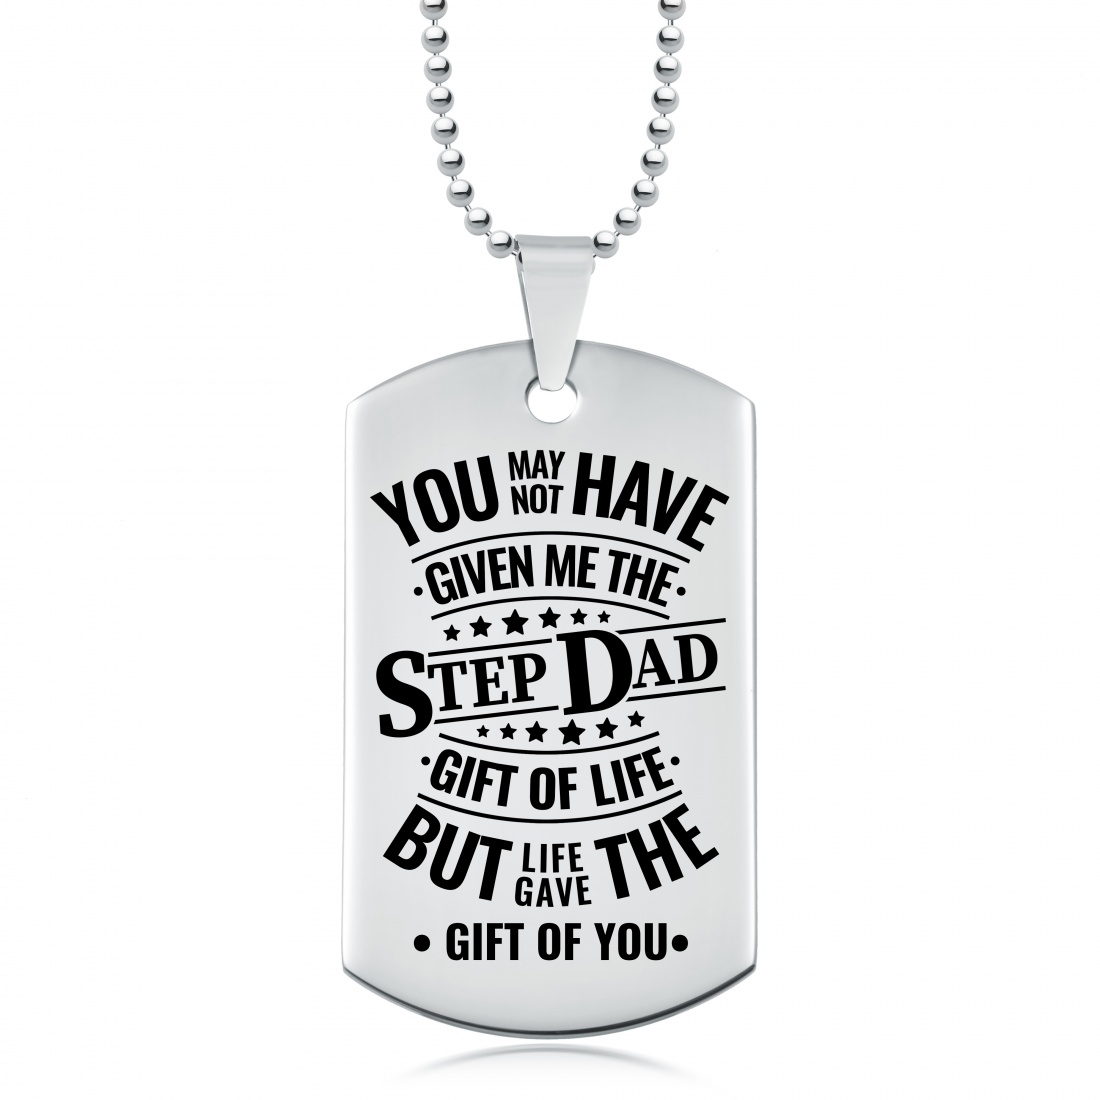 Step Dad Dog Tag Necklace Personalised, Gift of Life, Gift of You